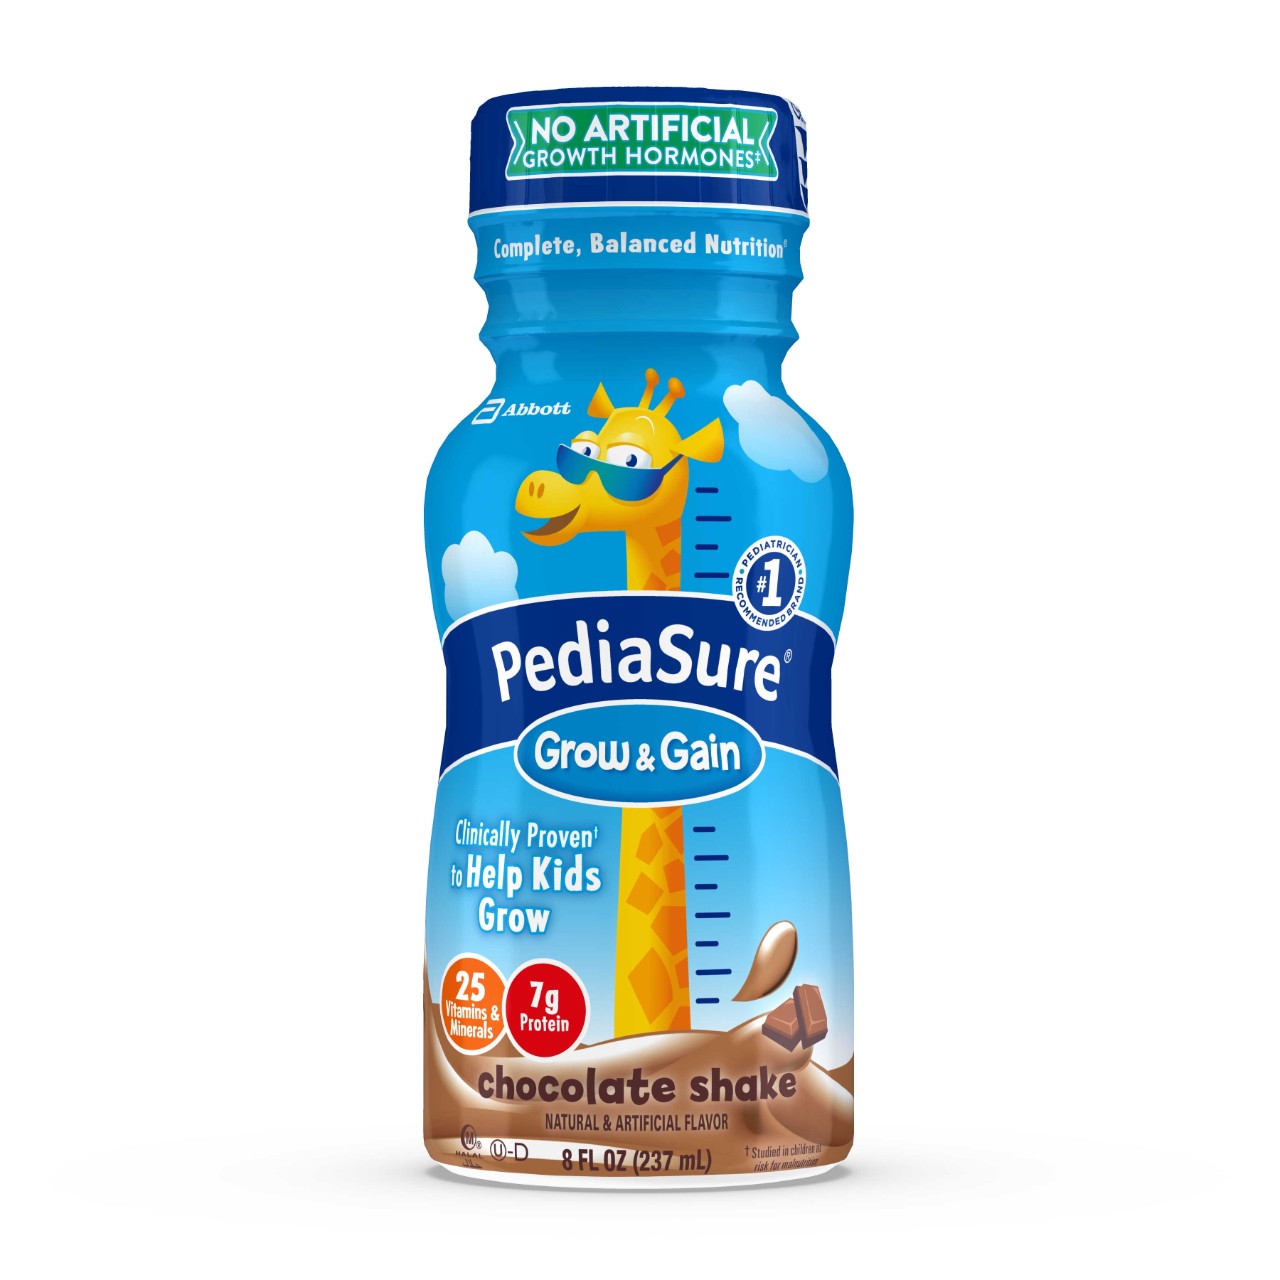 Complete, Balanced Nutrition® that helps kids grow—with protein, DHA omega-3, and vitamins & minerals.